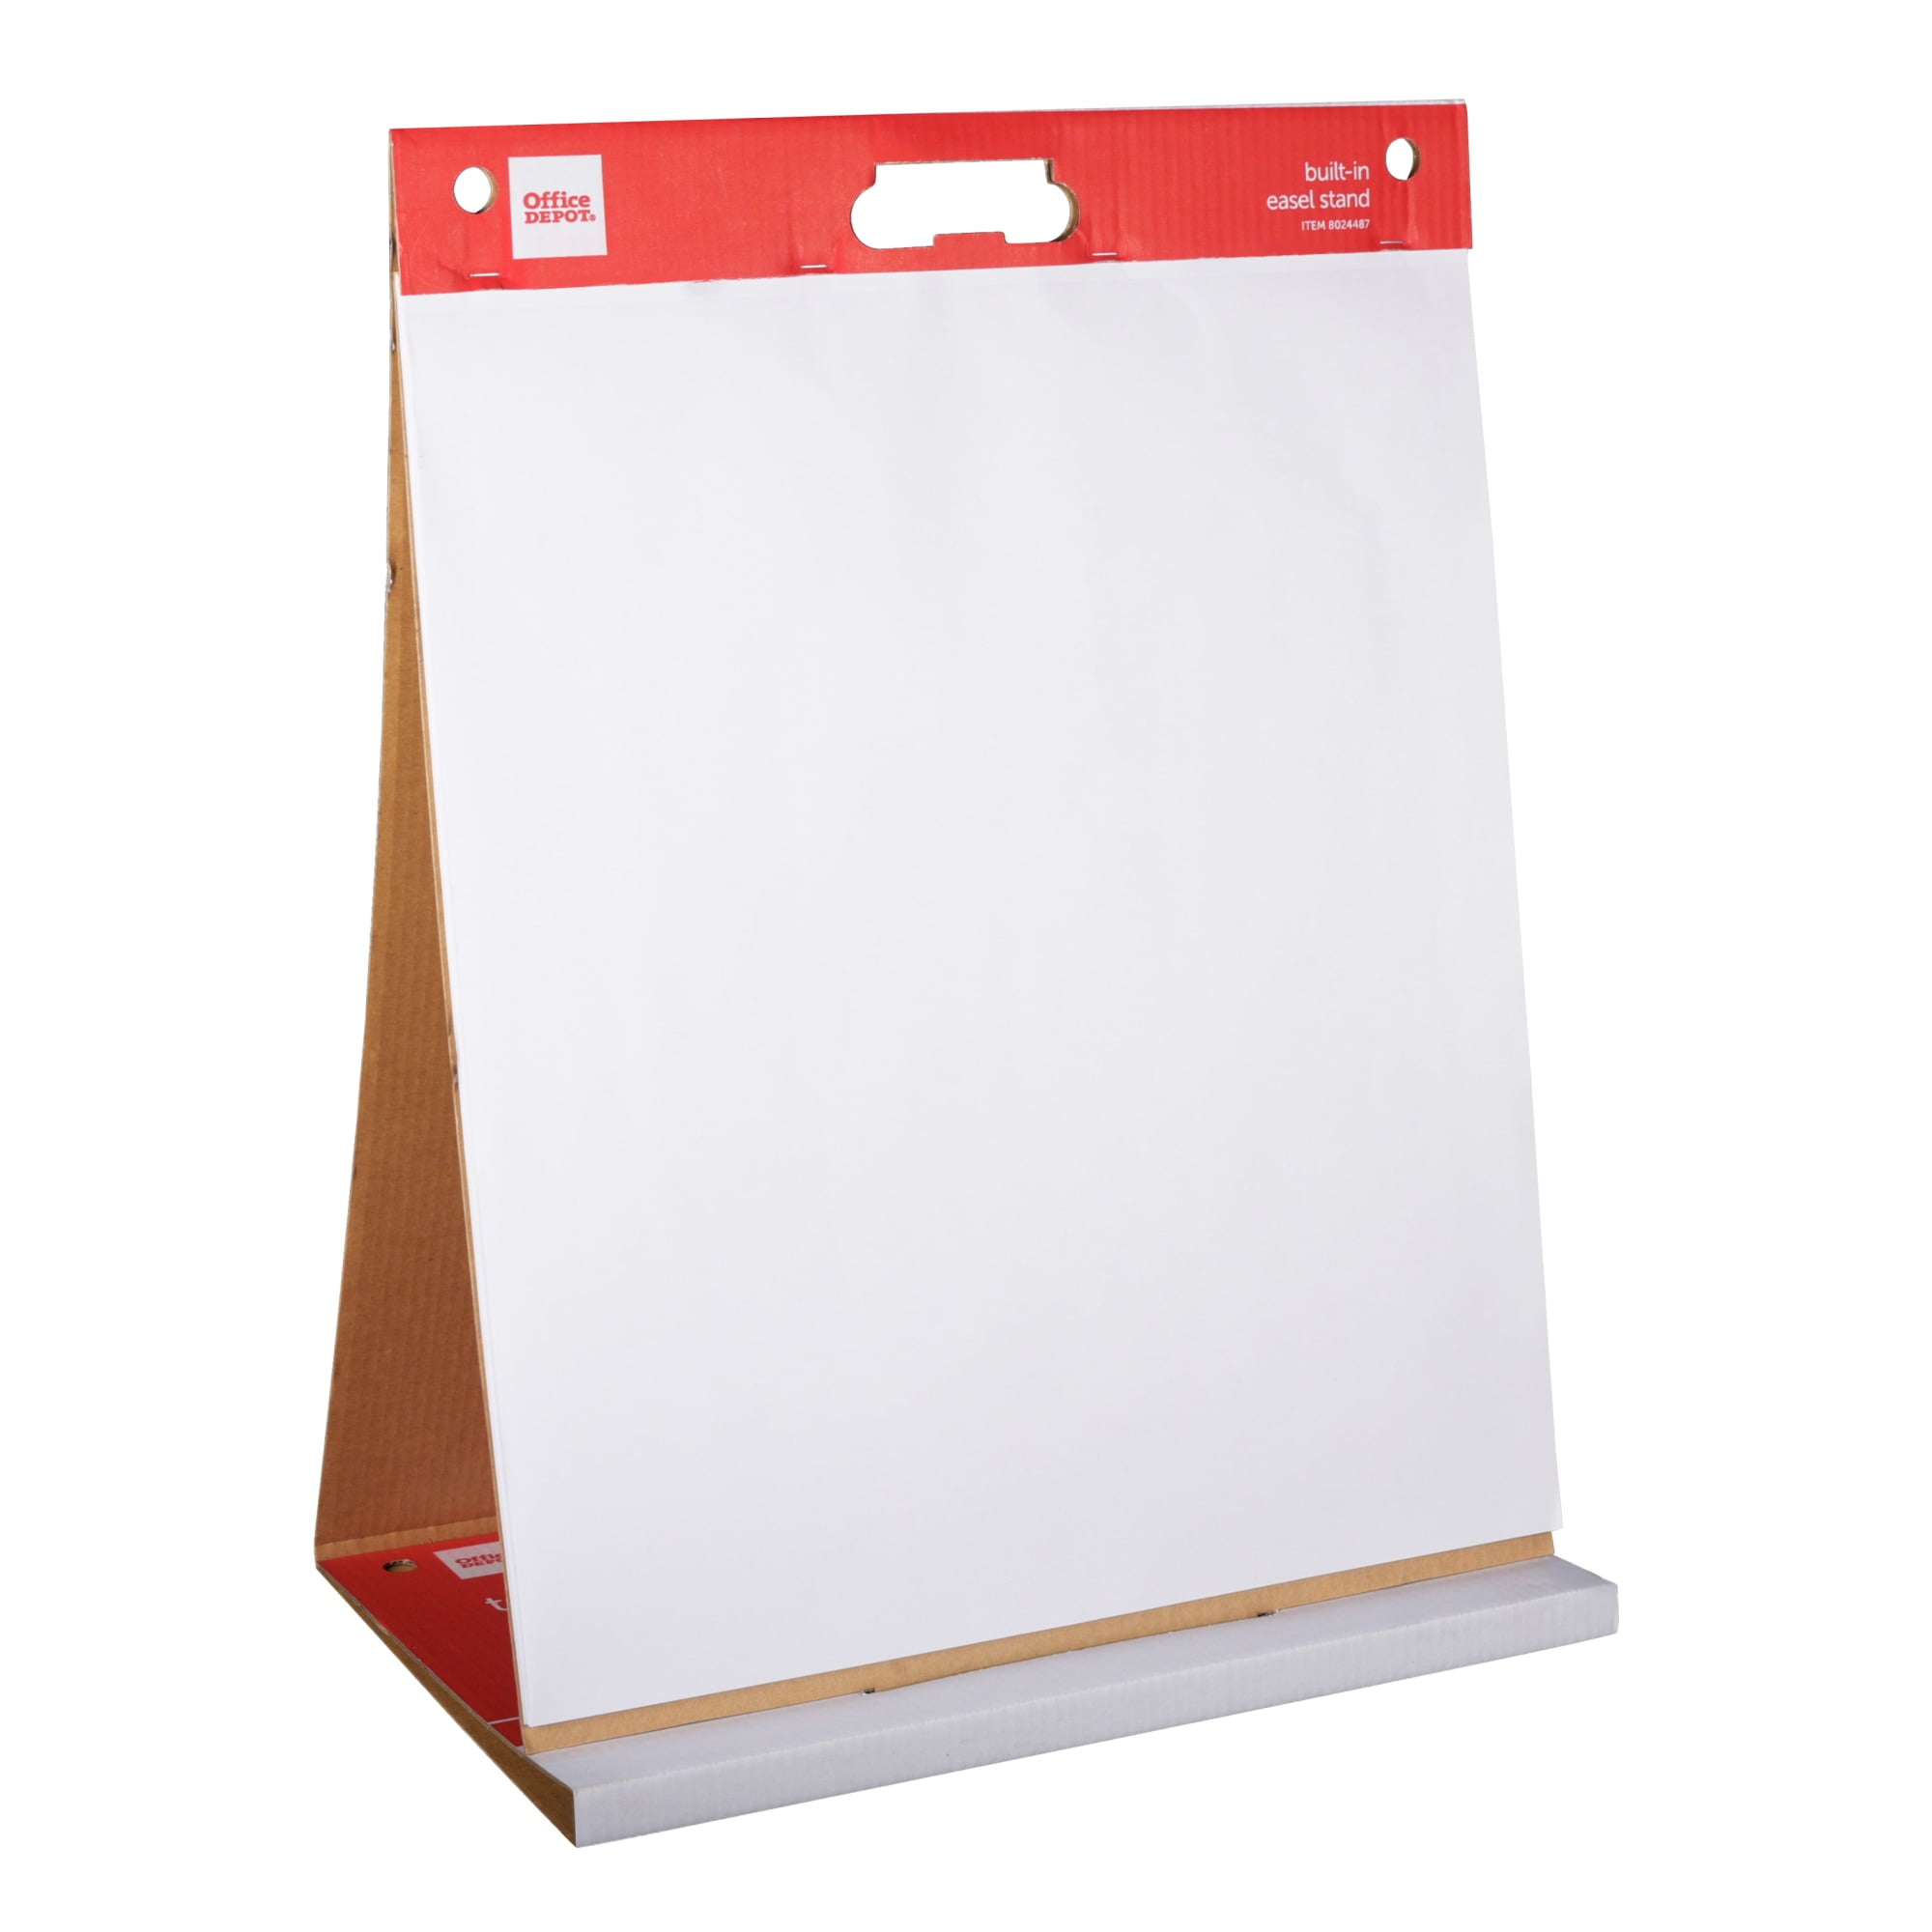 Pacon 4765 24 x 200' White 35# Easel Paper Roll